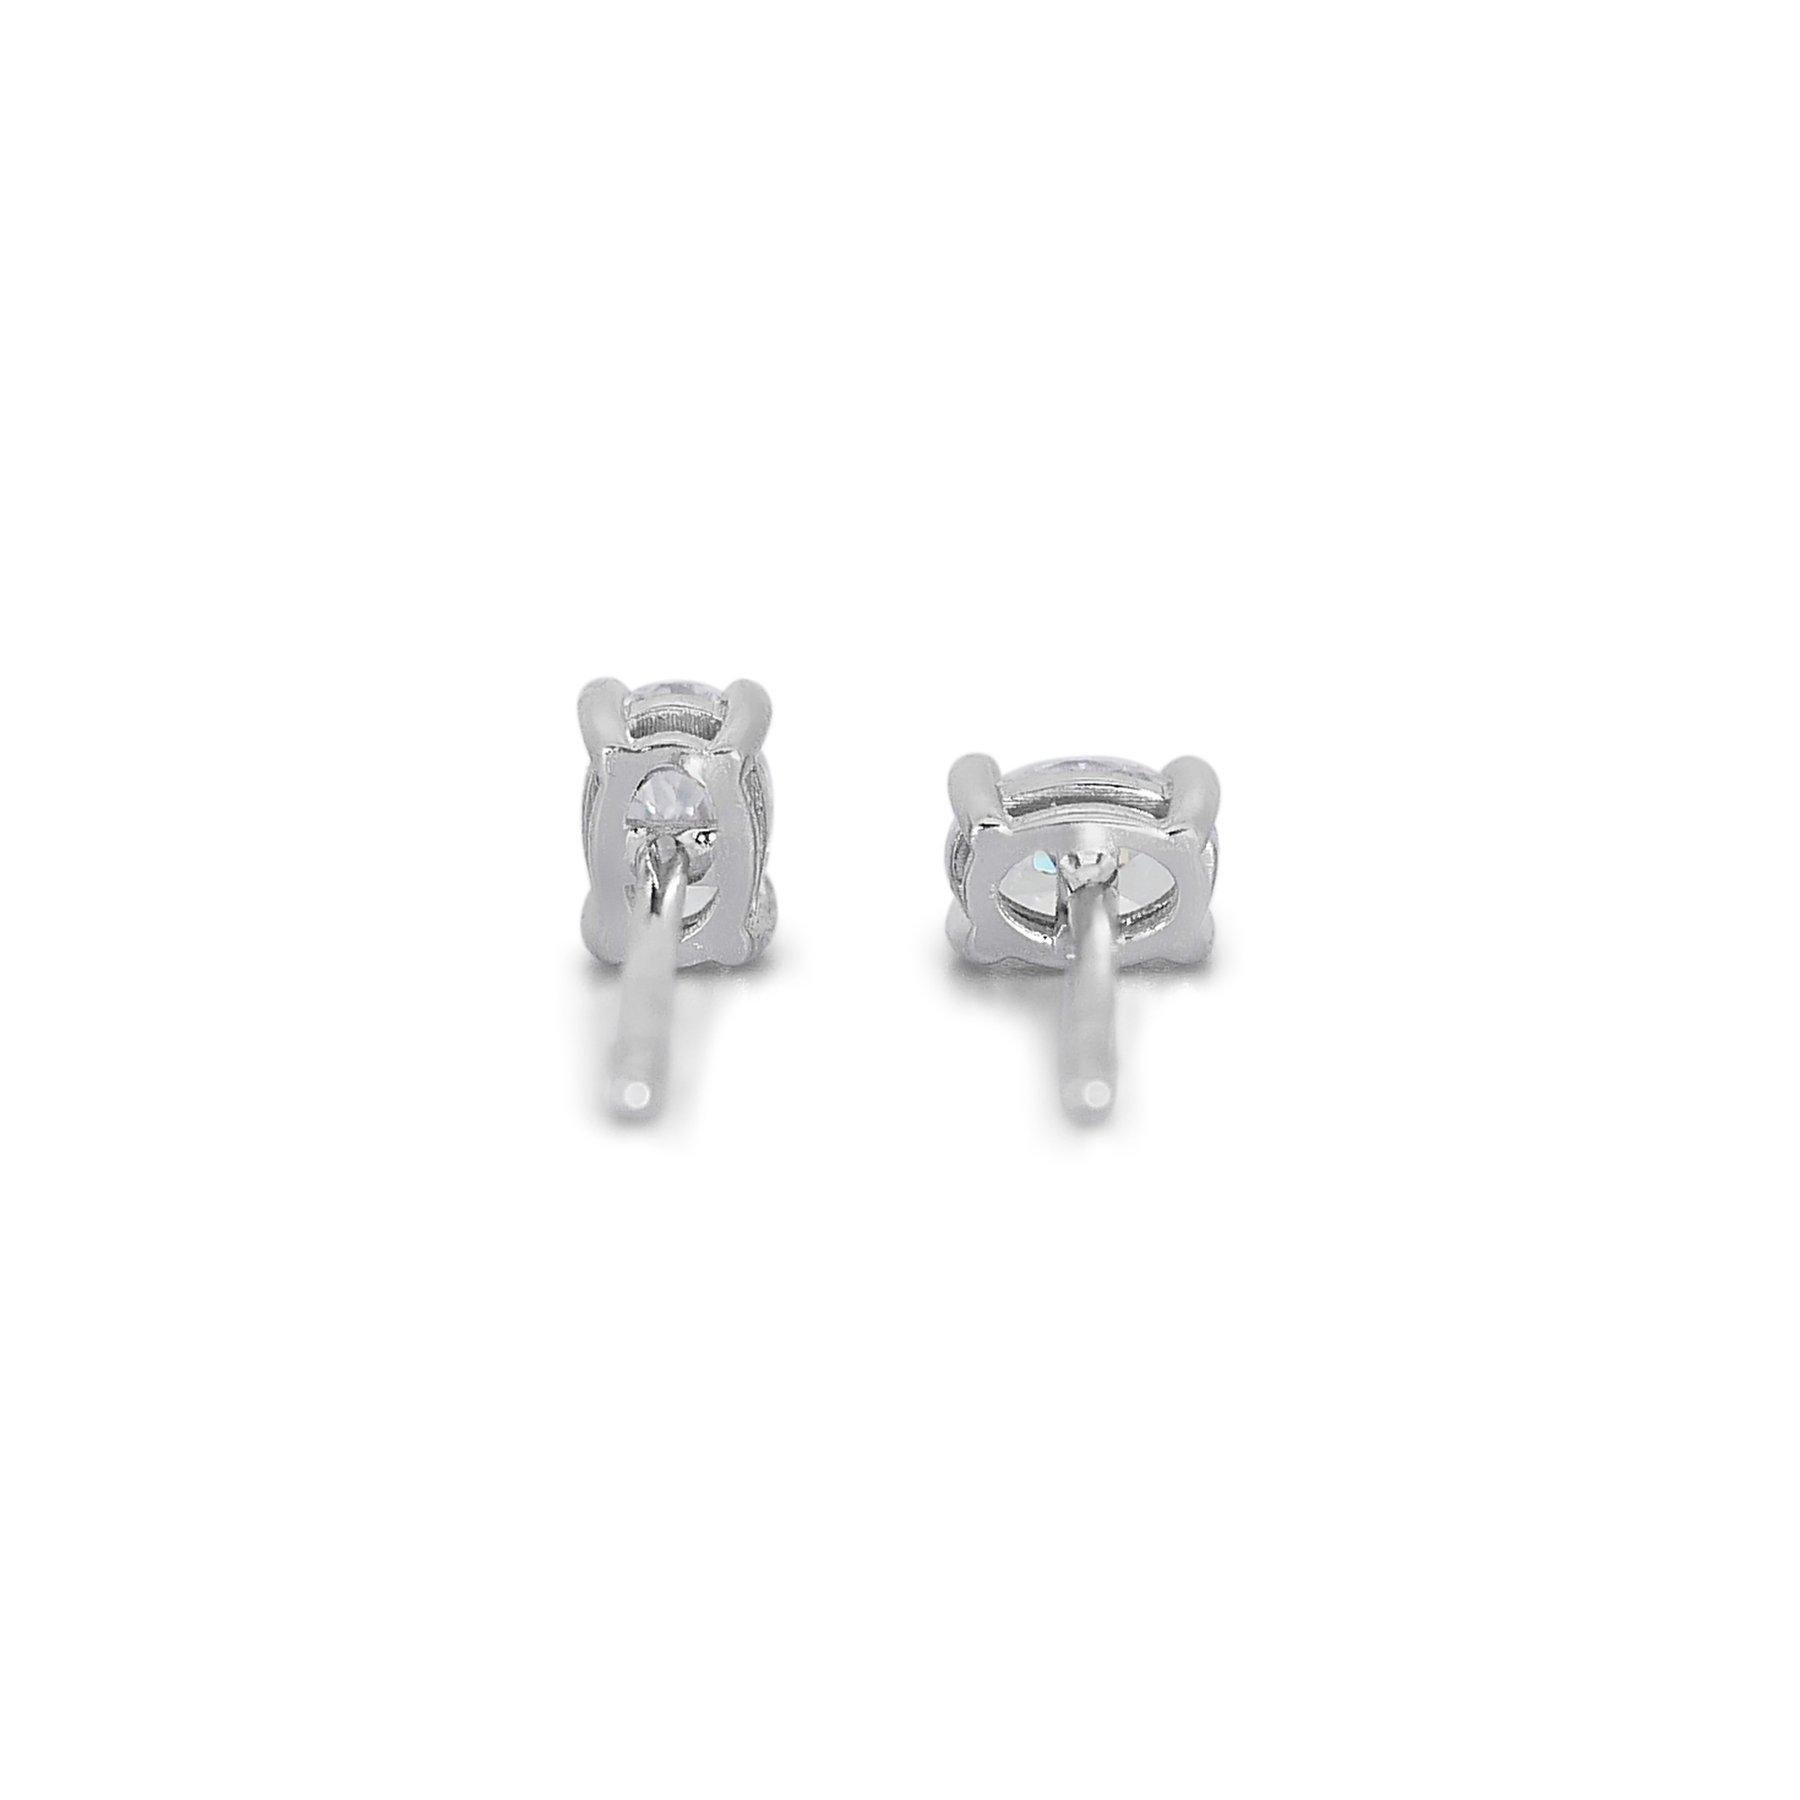 Sparkling 1.82ct Diamond Stud Earrings in 18k White Gold - GIA Certified  For Sale 3